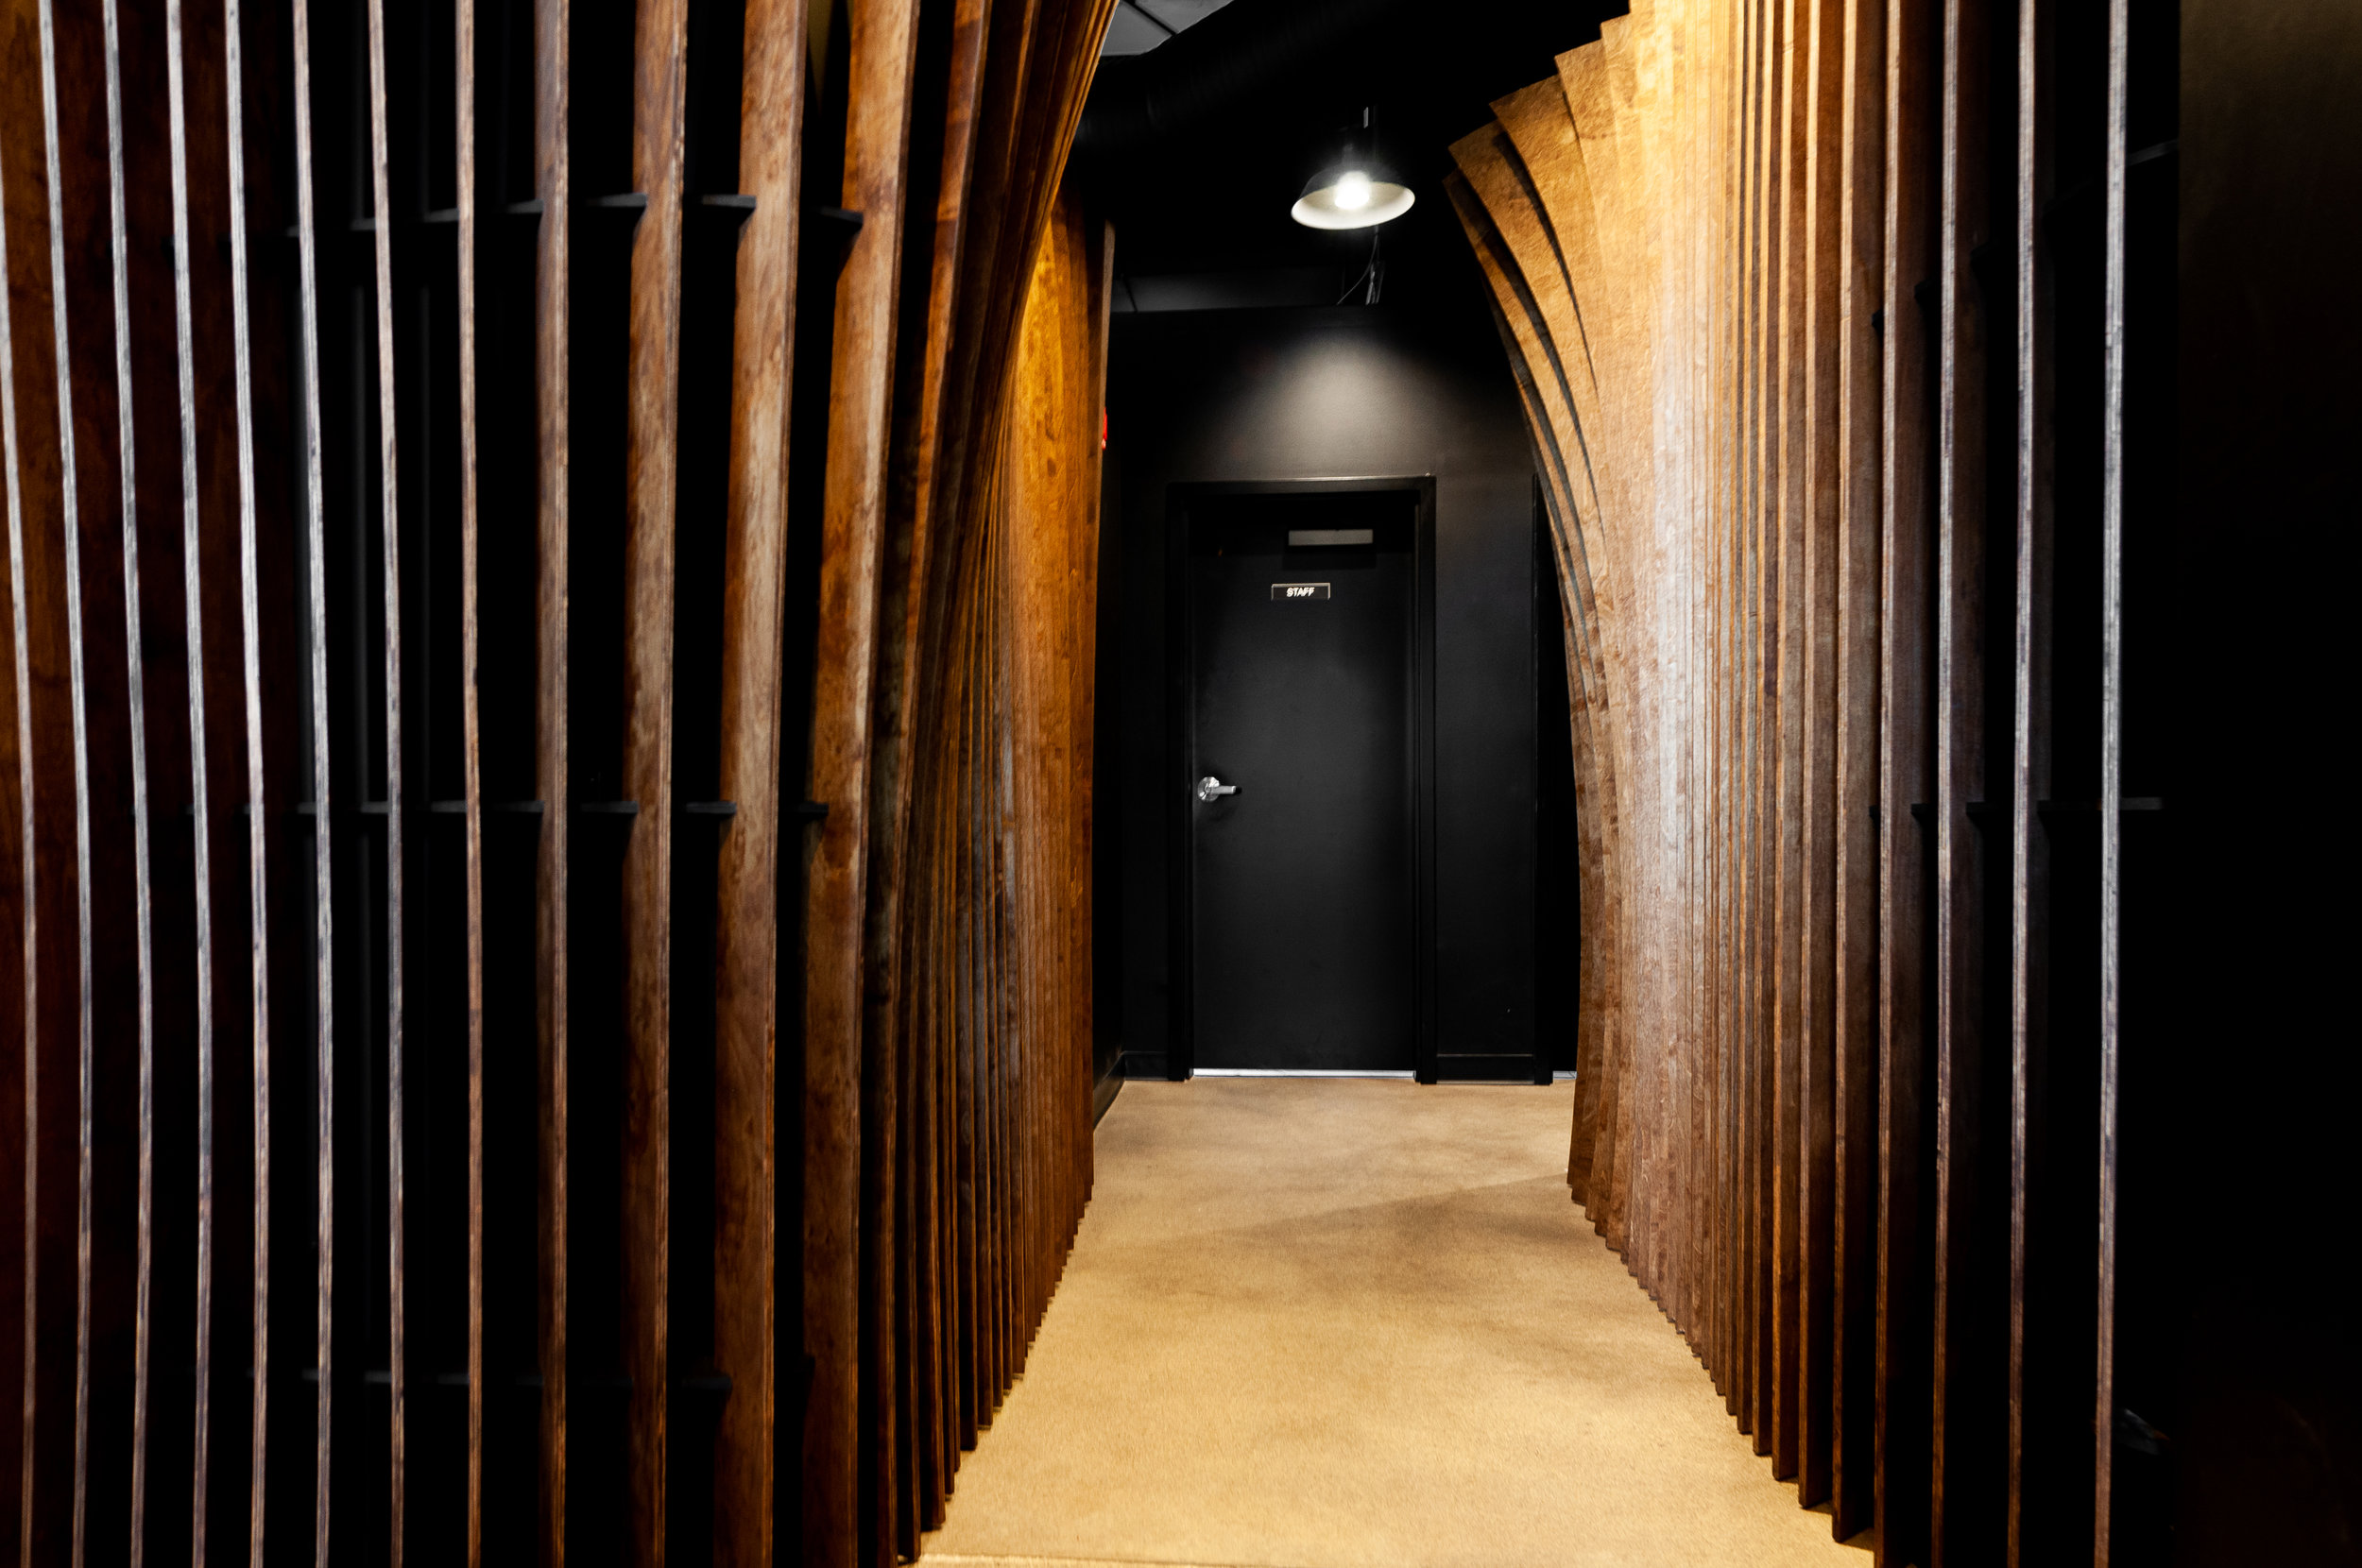  This feature hallway installation at Cera Korean Restaurant was designed to enhance the experience of diners as they make their way to the restrooms. 